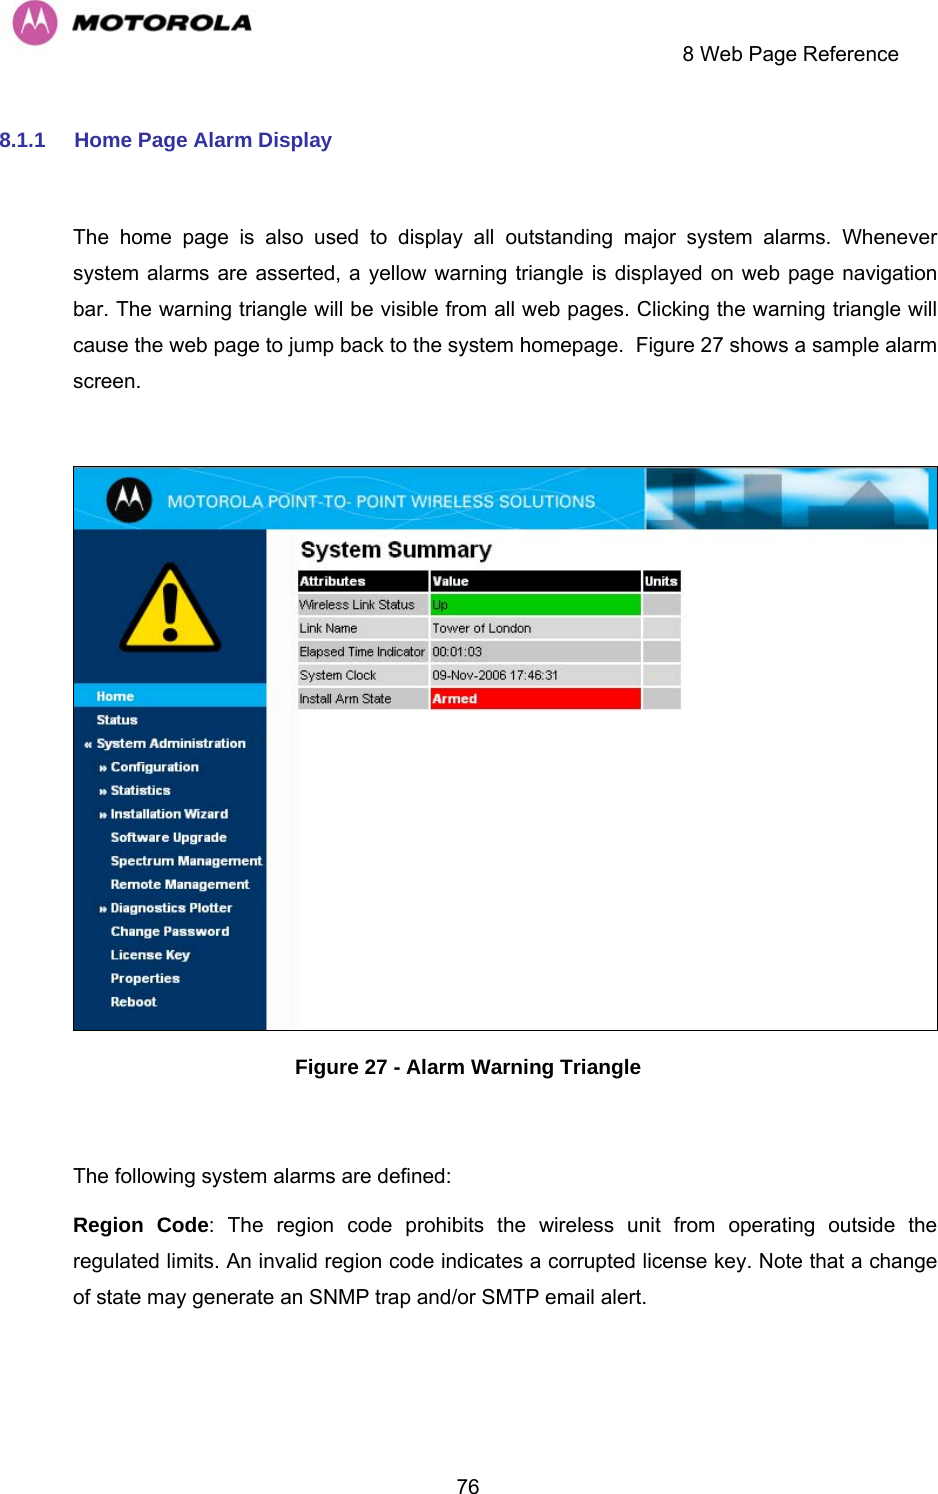     8 Web Page Reference  768.1.1  Home Page Alarm Display  The home page is also used to display all outstanding major system alarms. Whenever system alarms are asserted, a yellow warning triangle is displayed on web page navigation bar. The warning triangle will be visible from all web pages. Clicking the warning triangle will cause the web page to jump back to the system homepage.  Figure 27 shows a sample alarm screen.   Figure 27 - Alarm Warning Triangle  The following system alarms are defined:  Region Code: The region code prohibits the wireless unit from operating outside the regulated limits. An invalid region code indicates a corrupted license key. Note that a change of state may generate an SNMP trap and/or SMTP email alert. 